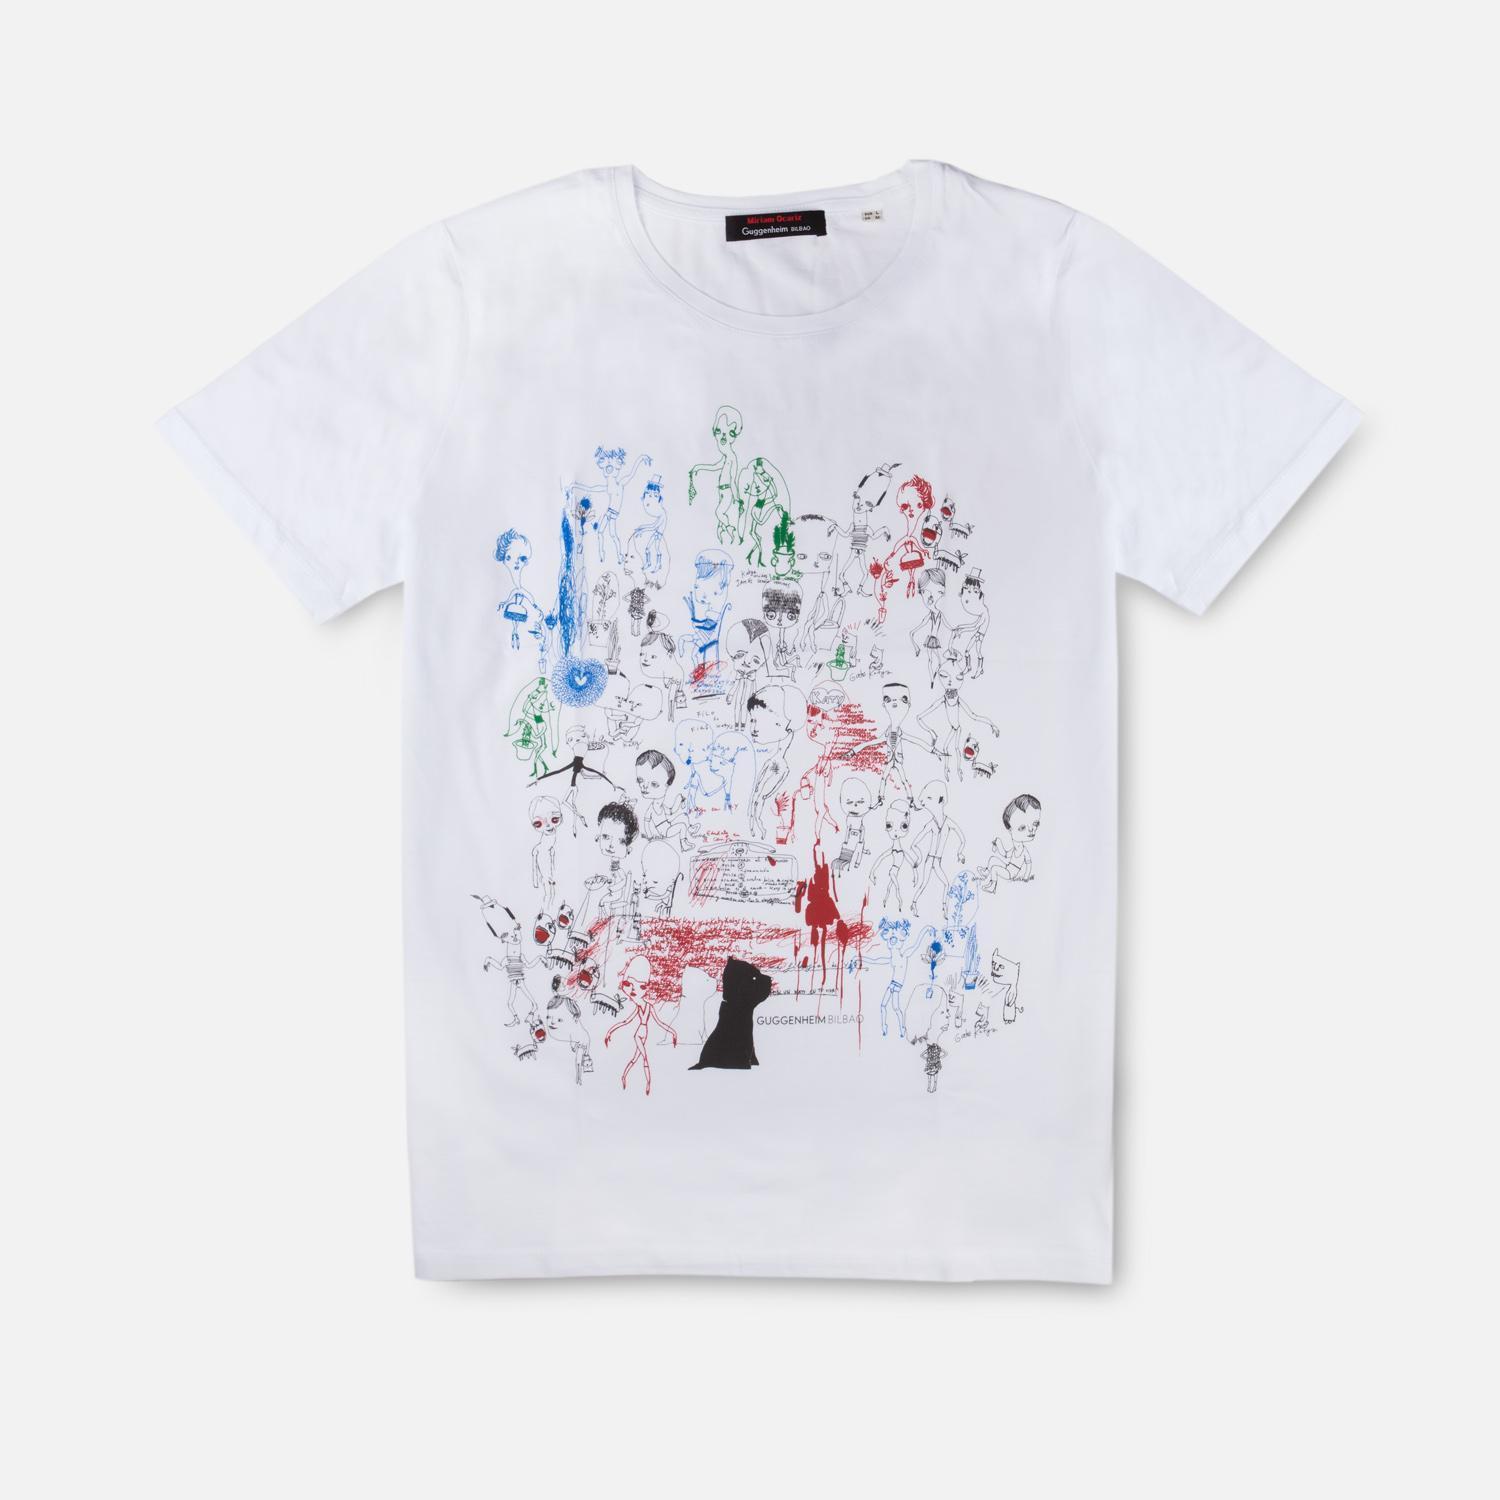 Puppy and personages T-shirt